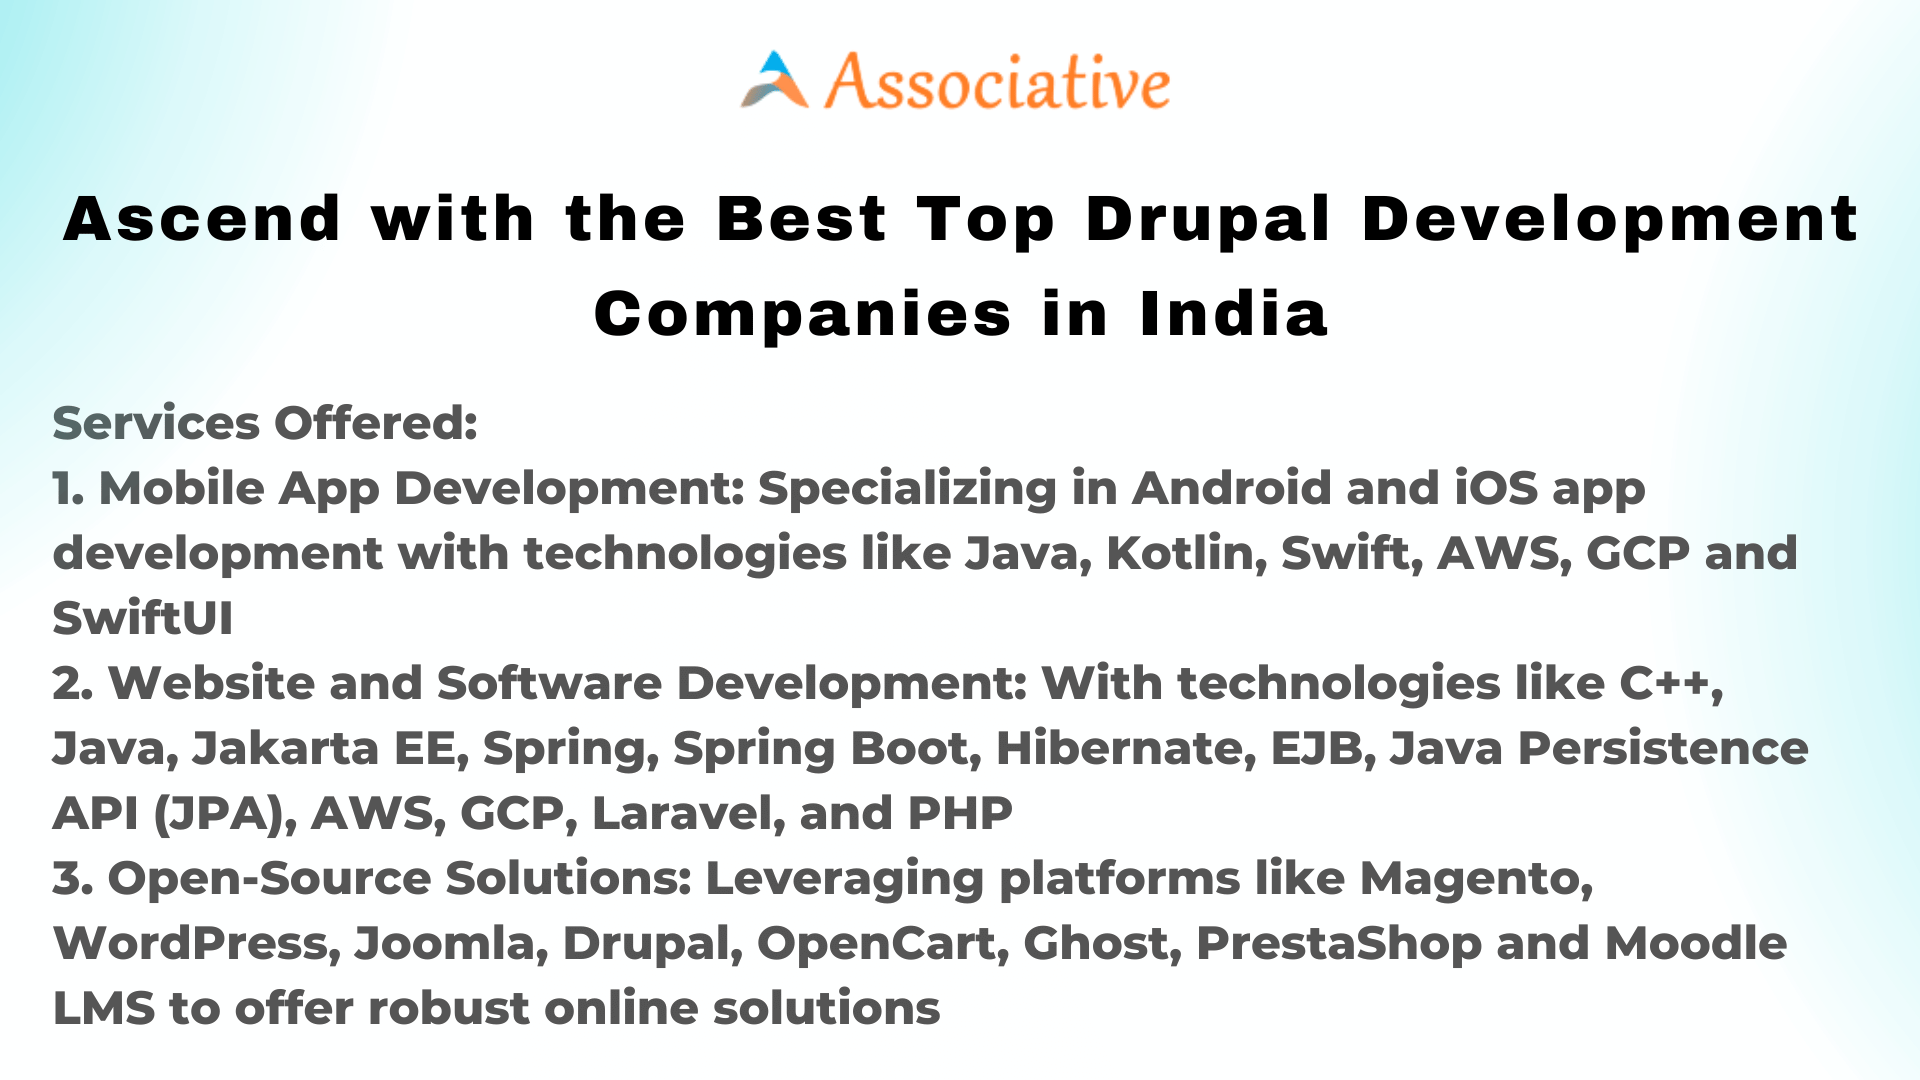 Ascend with the Best Top Drupal Development Companies in India